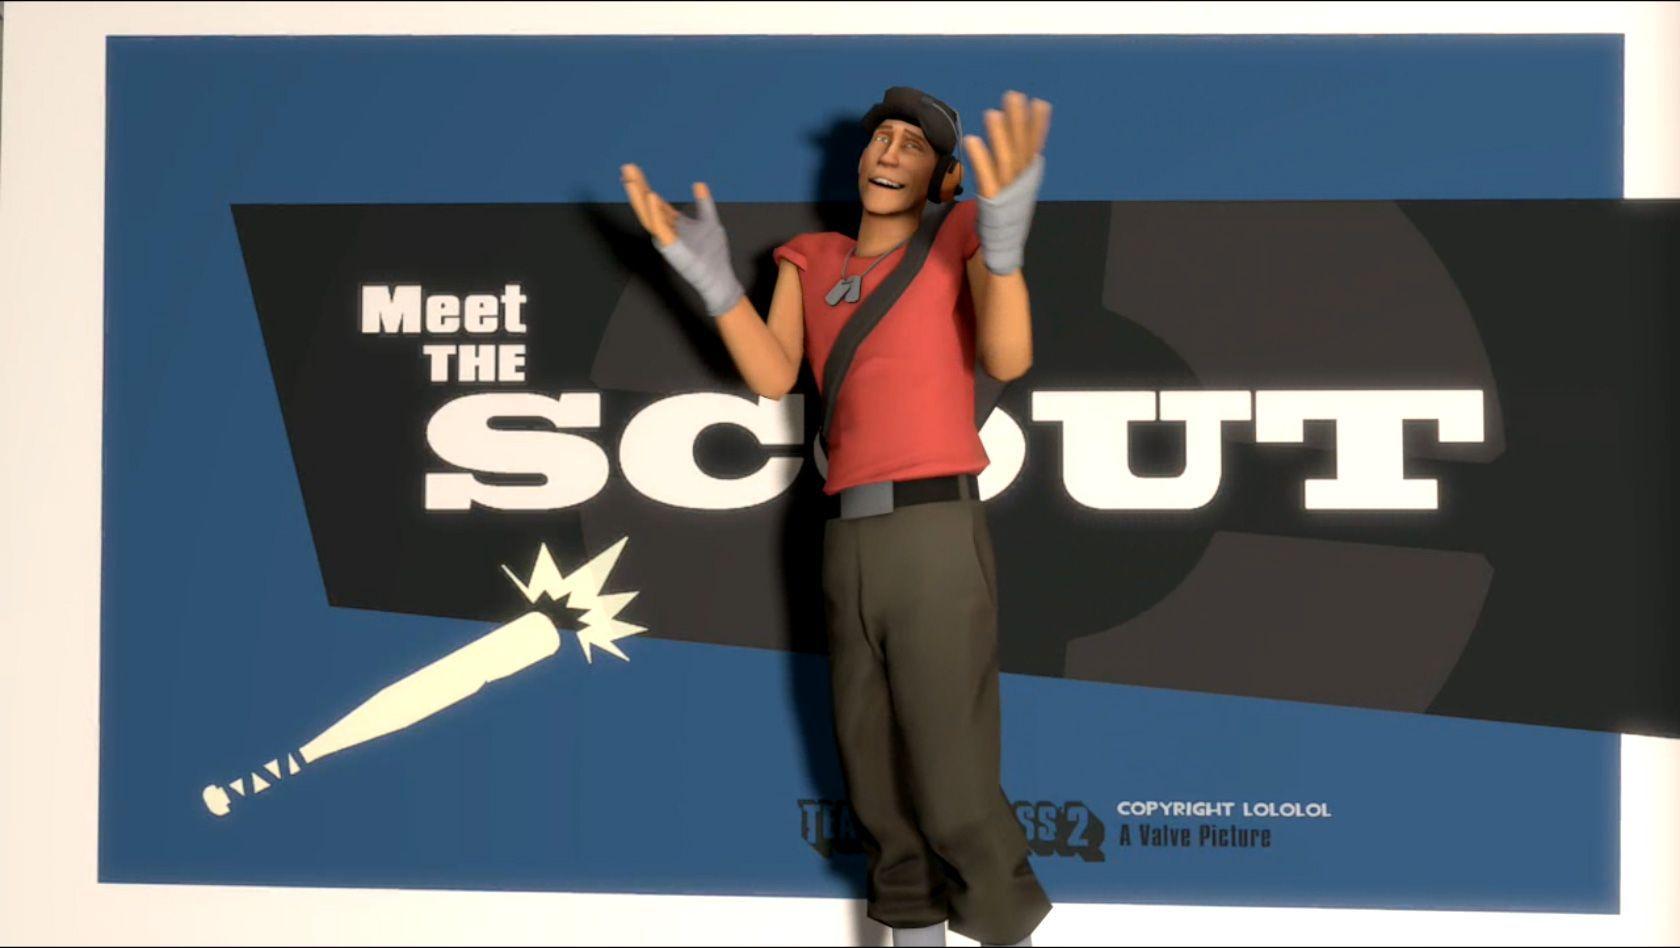 TF2 Video the Scout « TF2 Video the Scout